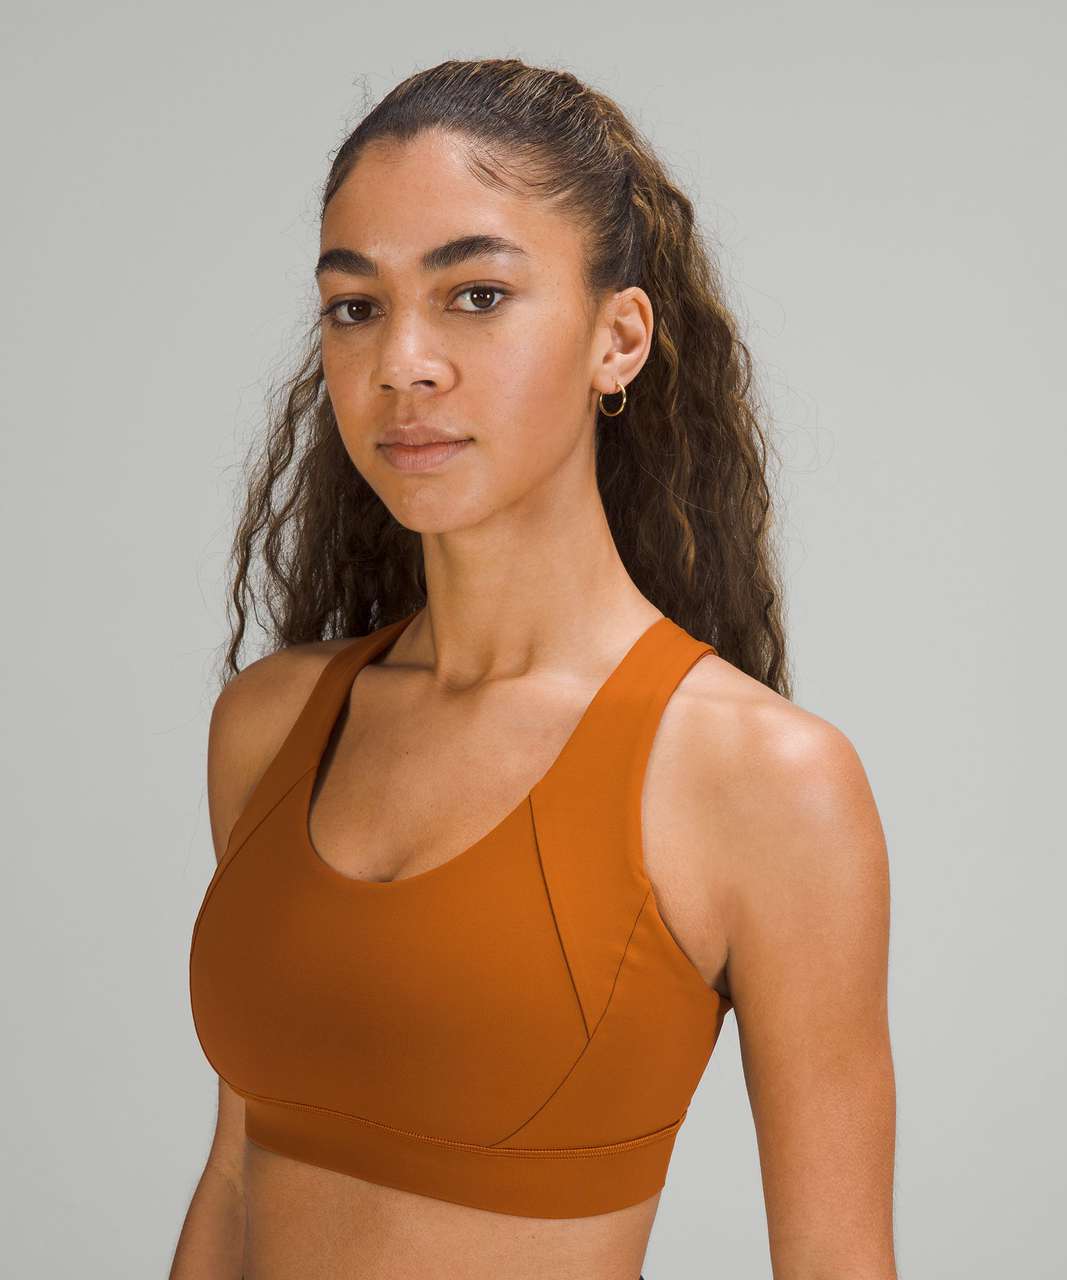 Lululemon Free to Be Elevated Bra *Light Support, DD/DDD(E) Cup - Butternut Brown